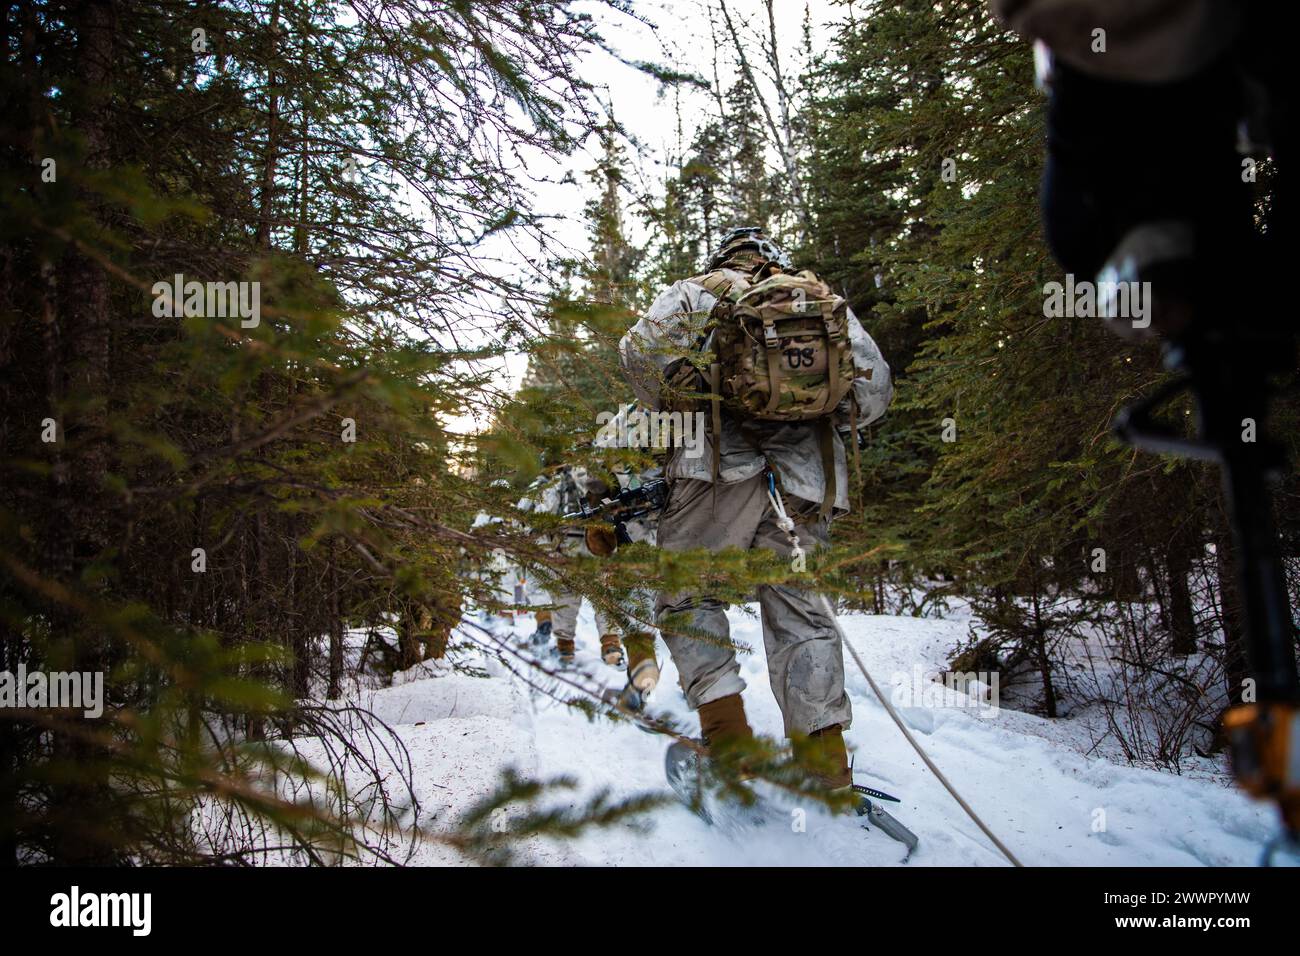 U.S. Soldiers, assigned to 1st Battalion, 5th Infantry Regiment, 1st Infantry Brigade Combat Team, 11th Airborne Division, carry equipment through a forest during Joint Pacific Multinational Readiness Center 24-02 at Donnelly Training Area, Alaska, Feb. 17, 2024. JPMRC 24-02 is held in the coldest part of the Alaskan winter, exposing roughly 10,000 joint, multi-national service members to unforgiving conditions, transferring the division’s expertise in the Arctic in support of the Army, the DoD and the Nation’s Arctic and Defense Strategies.  Army Stock Photo